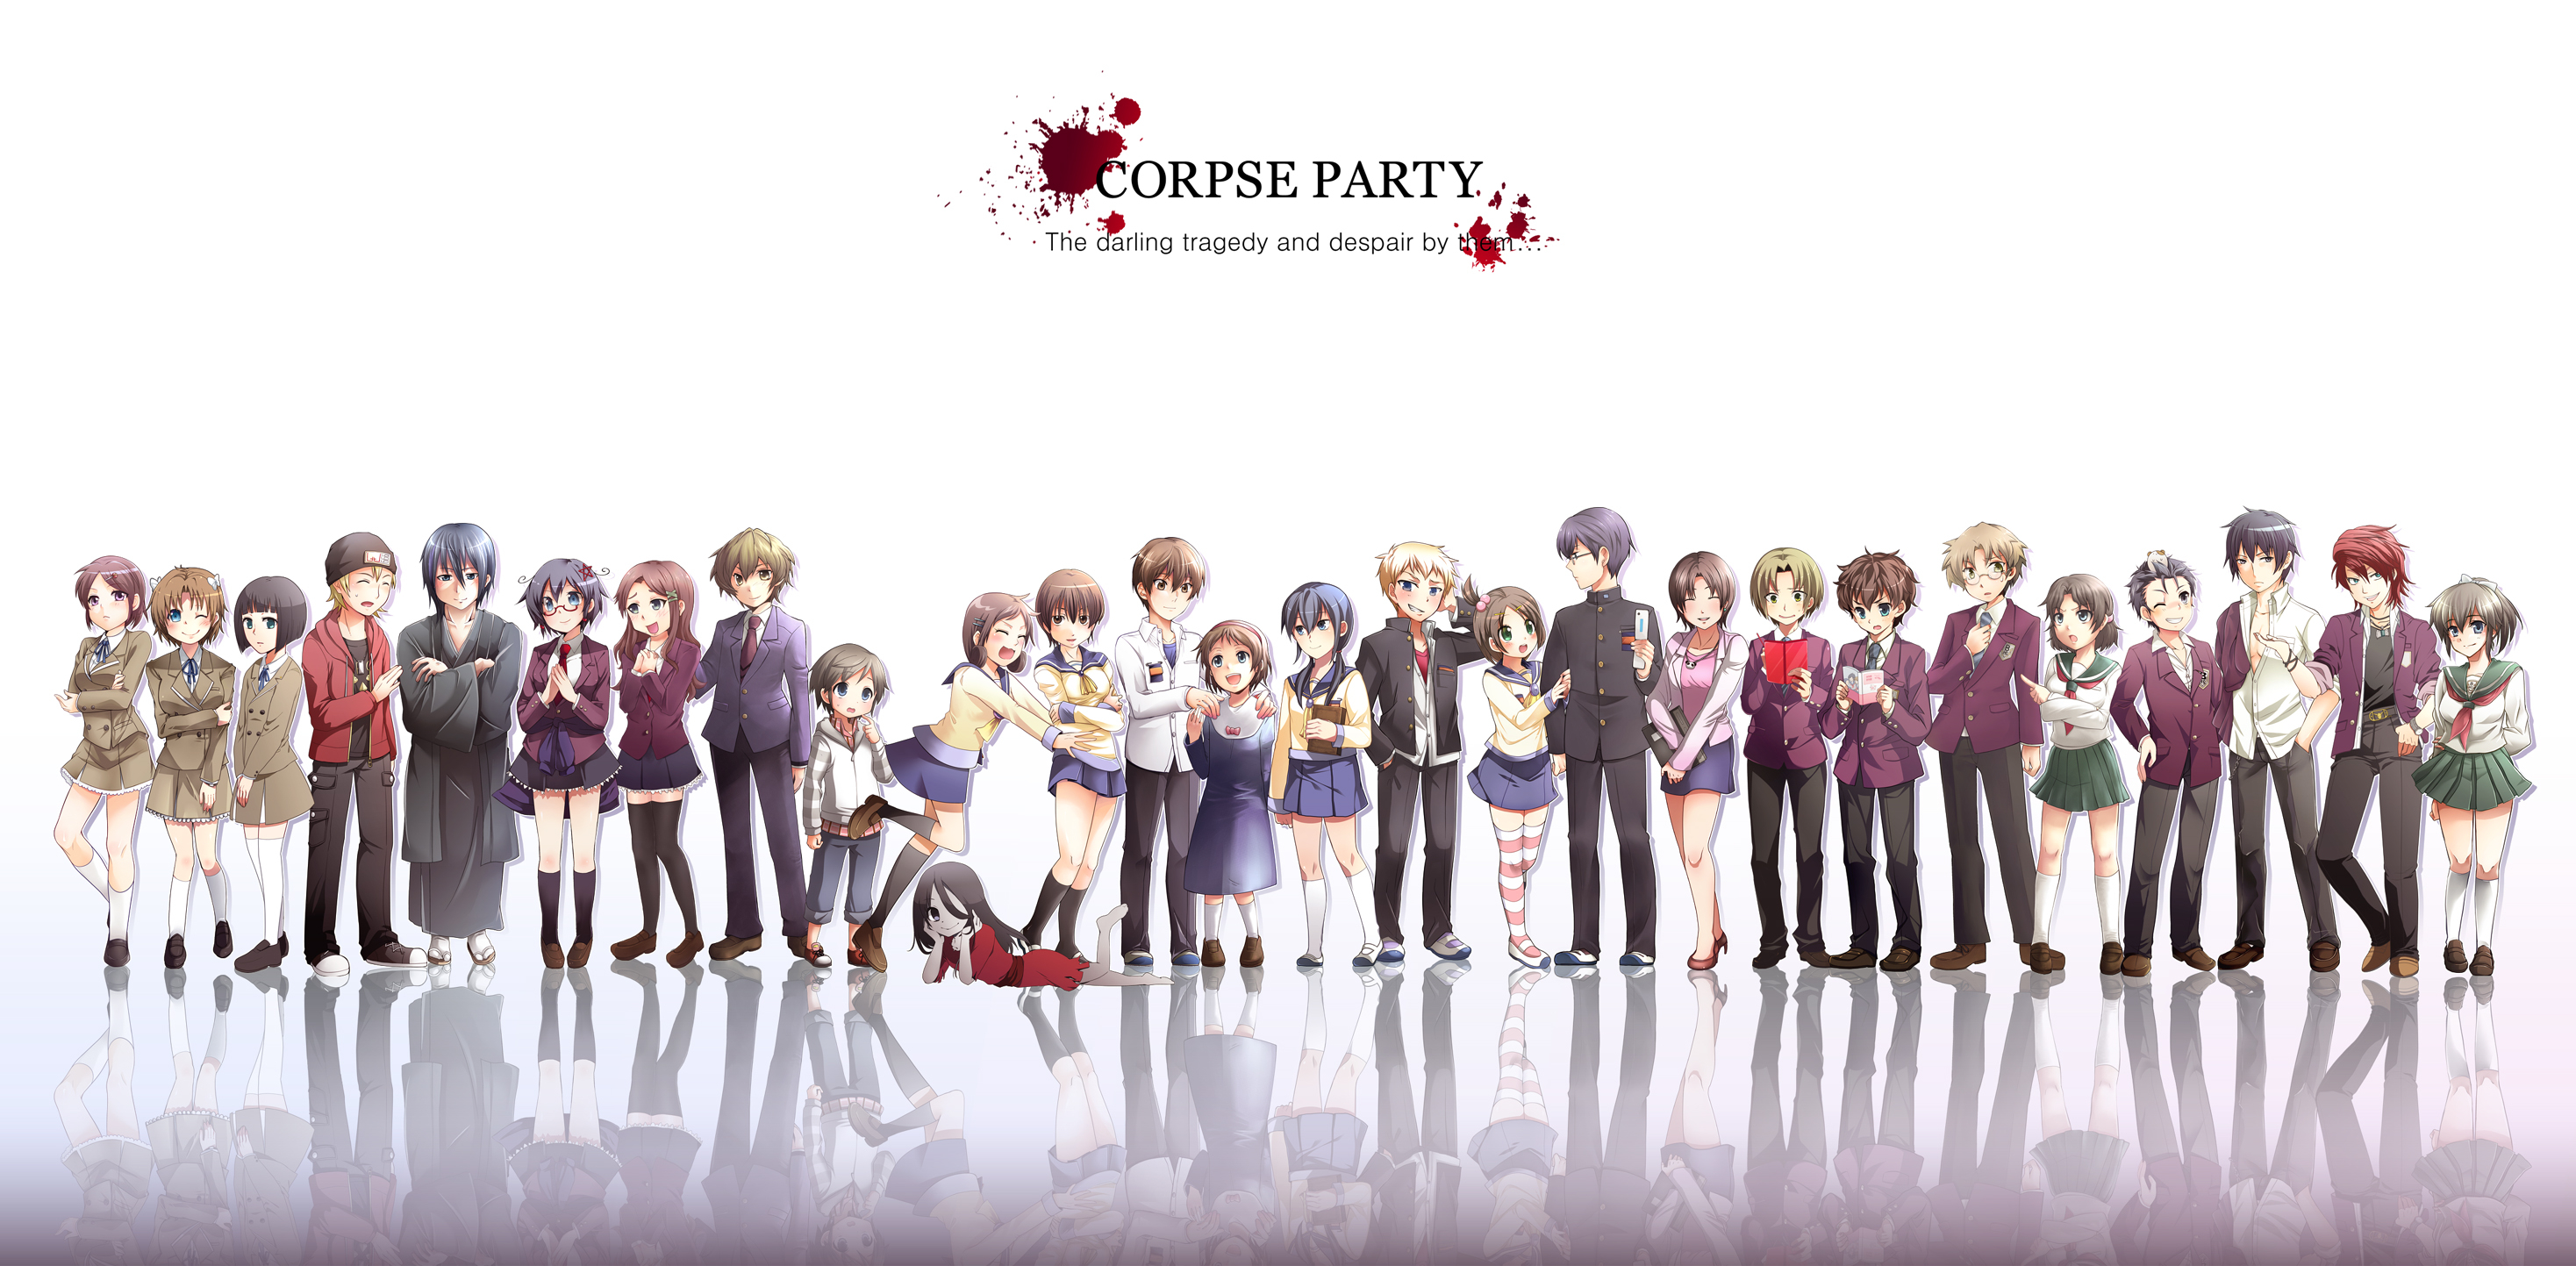 10 Corpse Party HD Wallpapers and Backgrounds